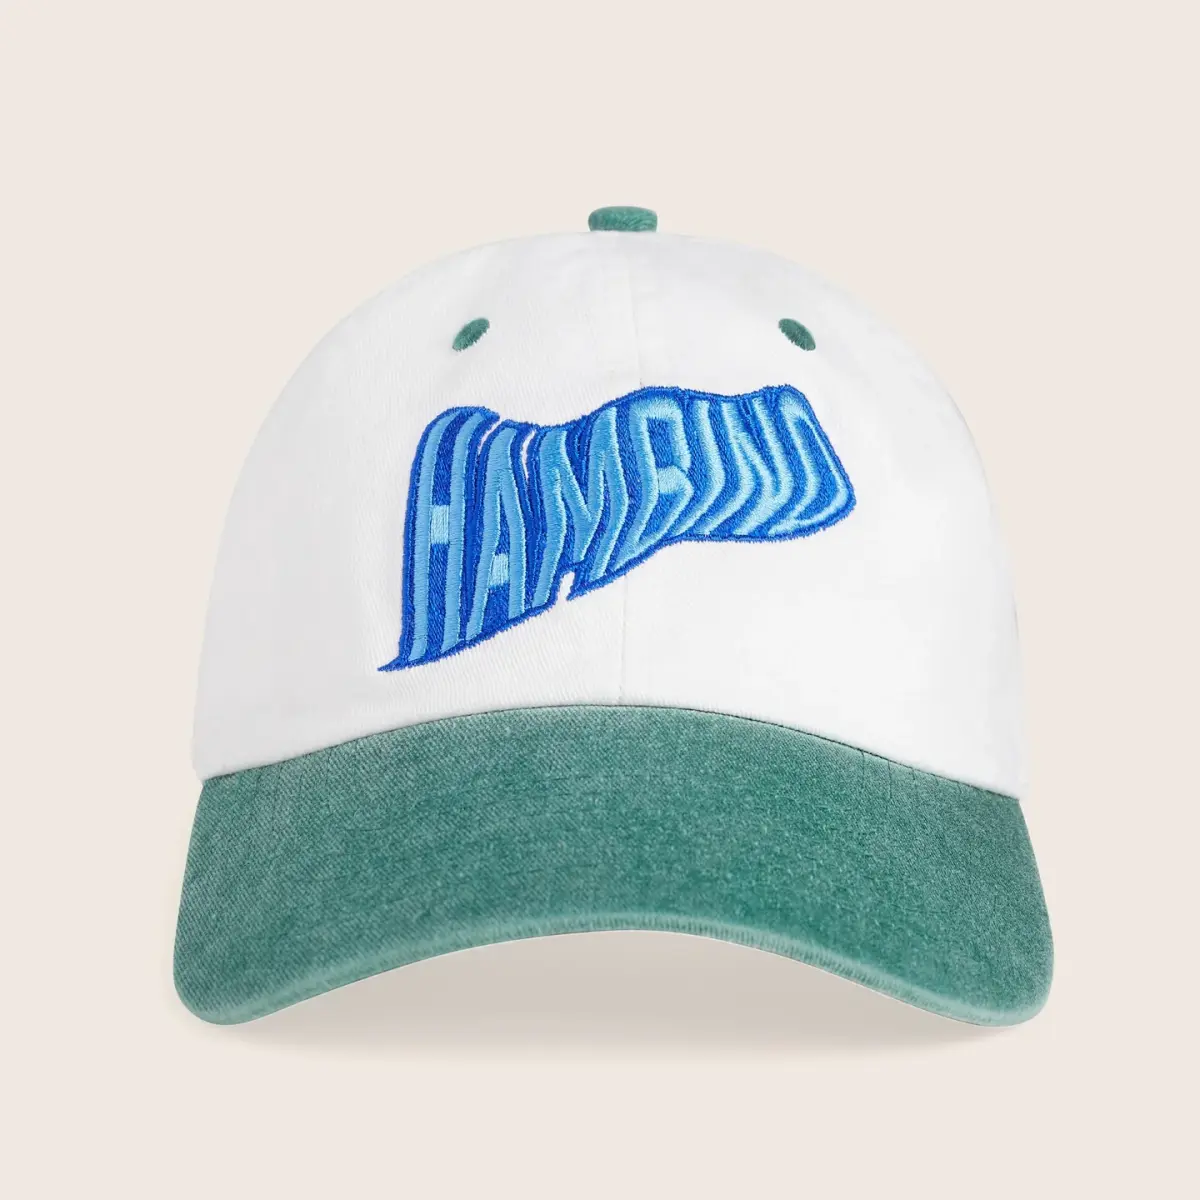 hat-the-mighty-hat-dad-cap-green-white-flat-lay-tan-1_1440x